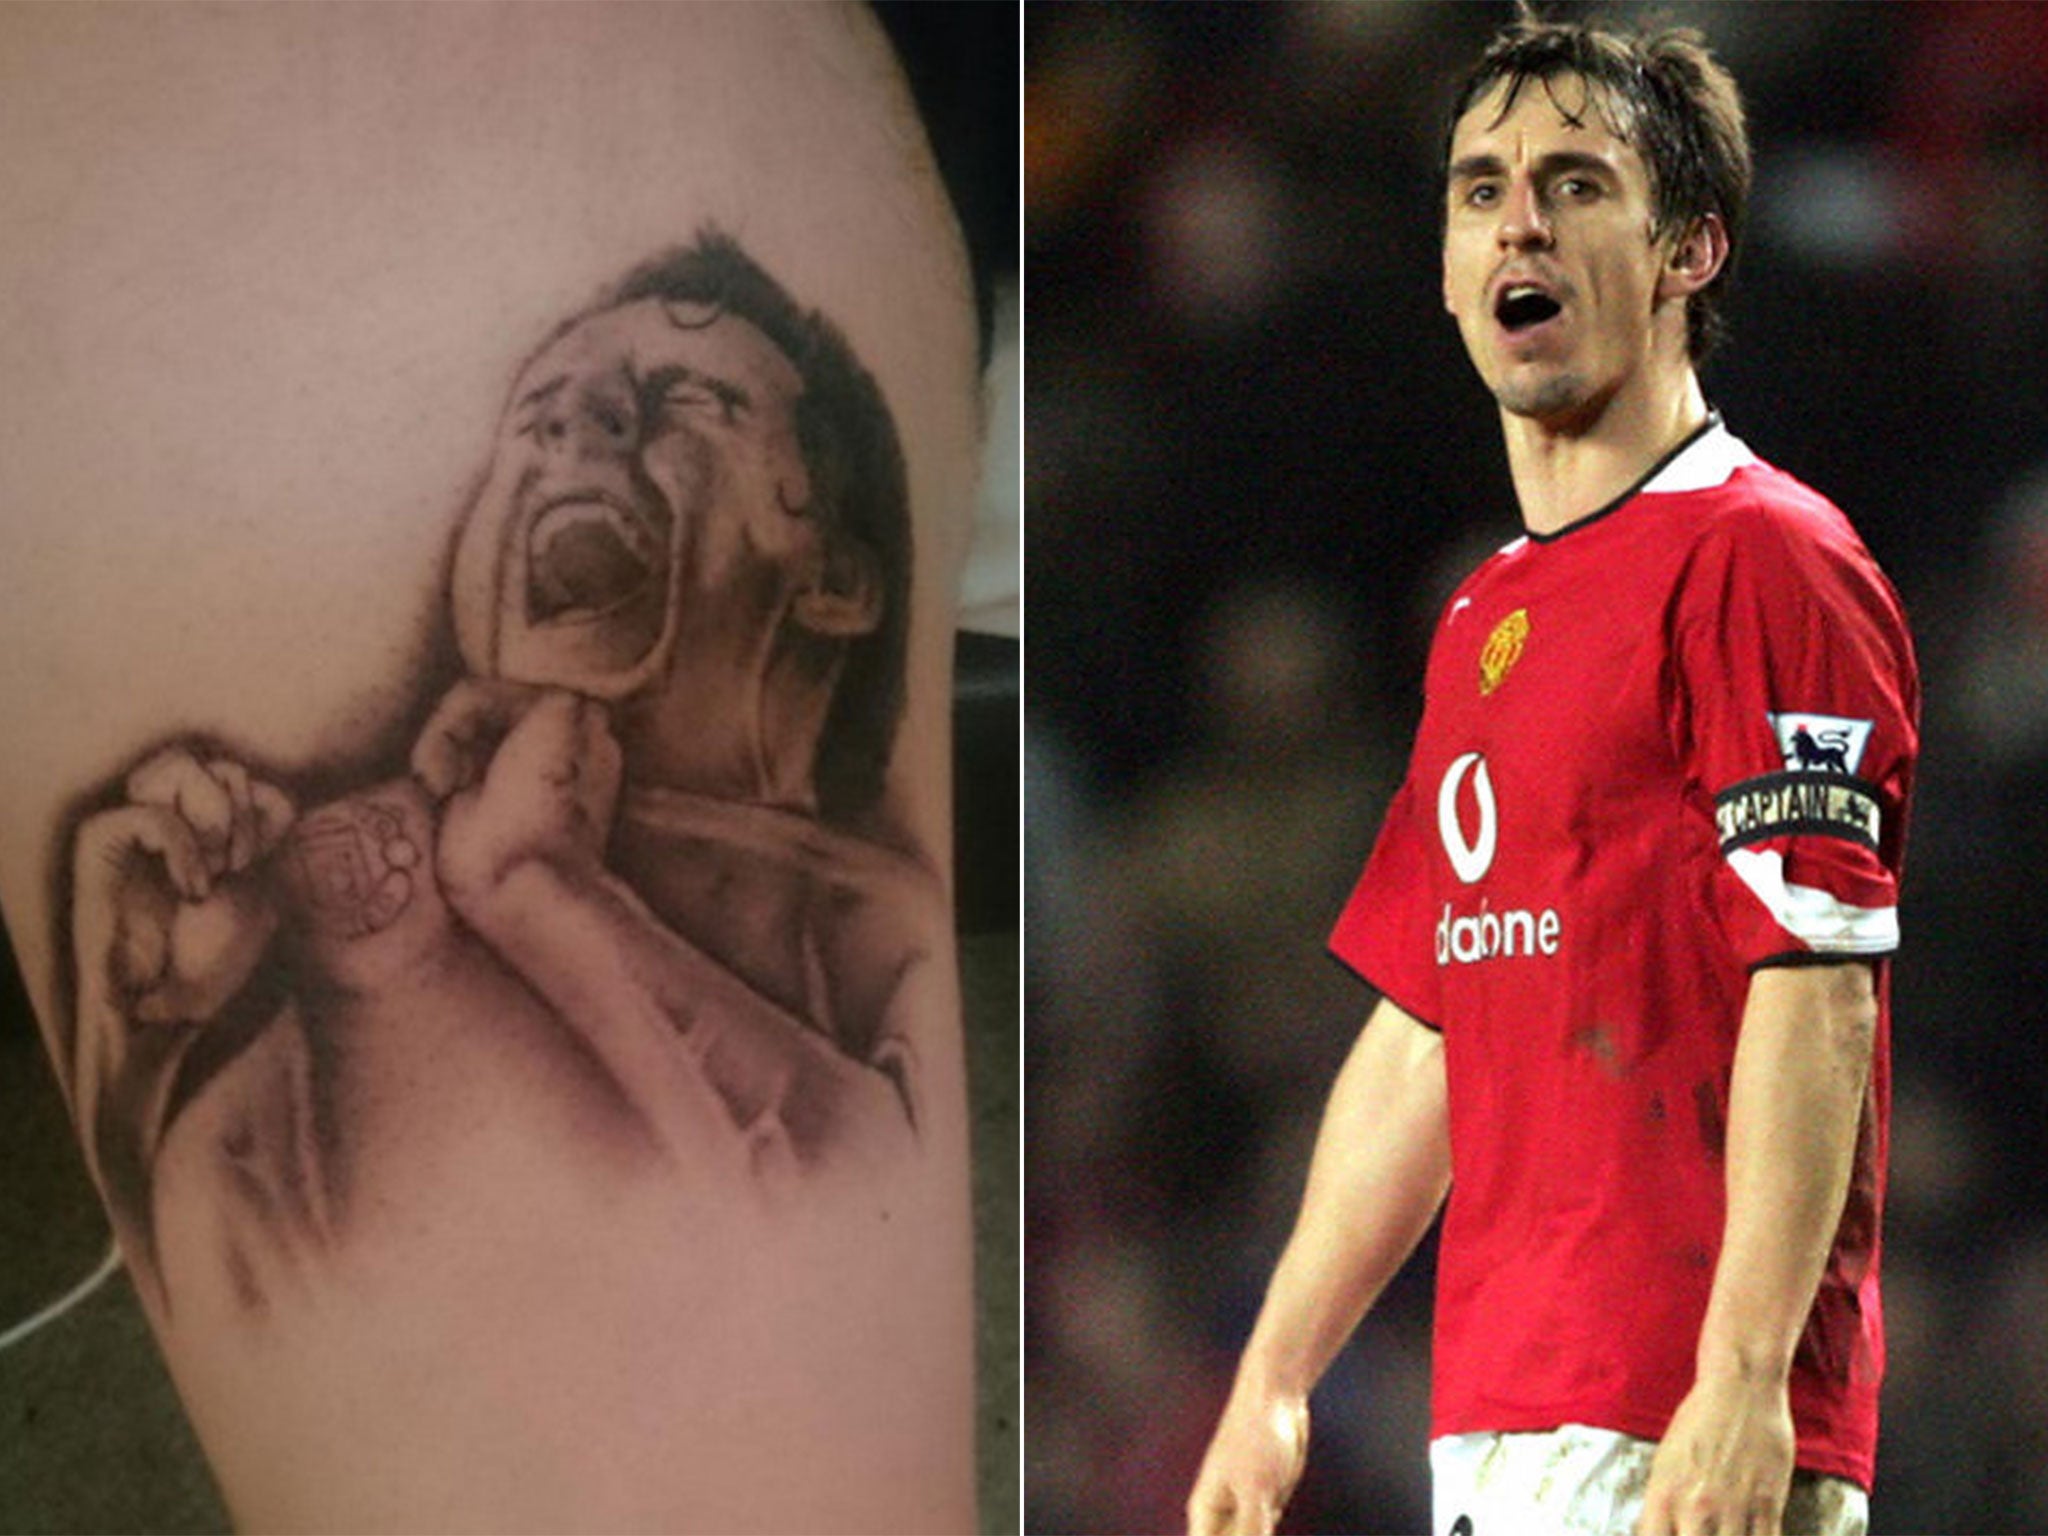 Gary Neville and the tattoo